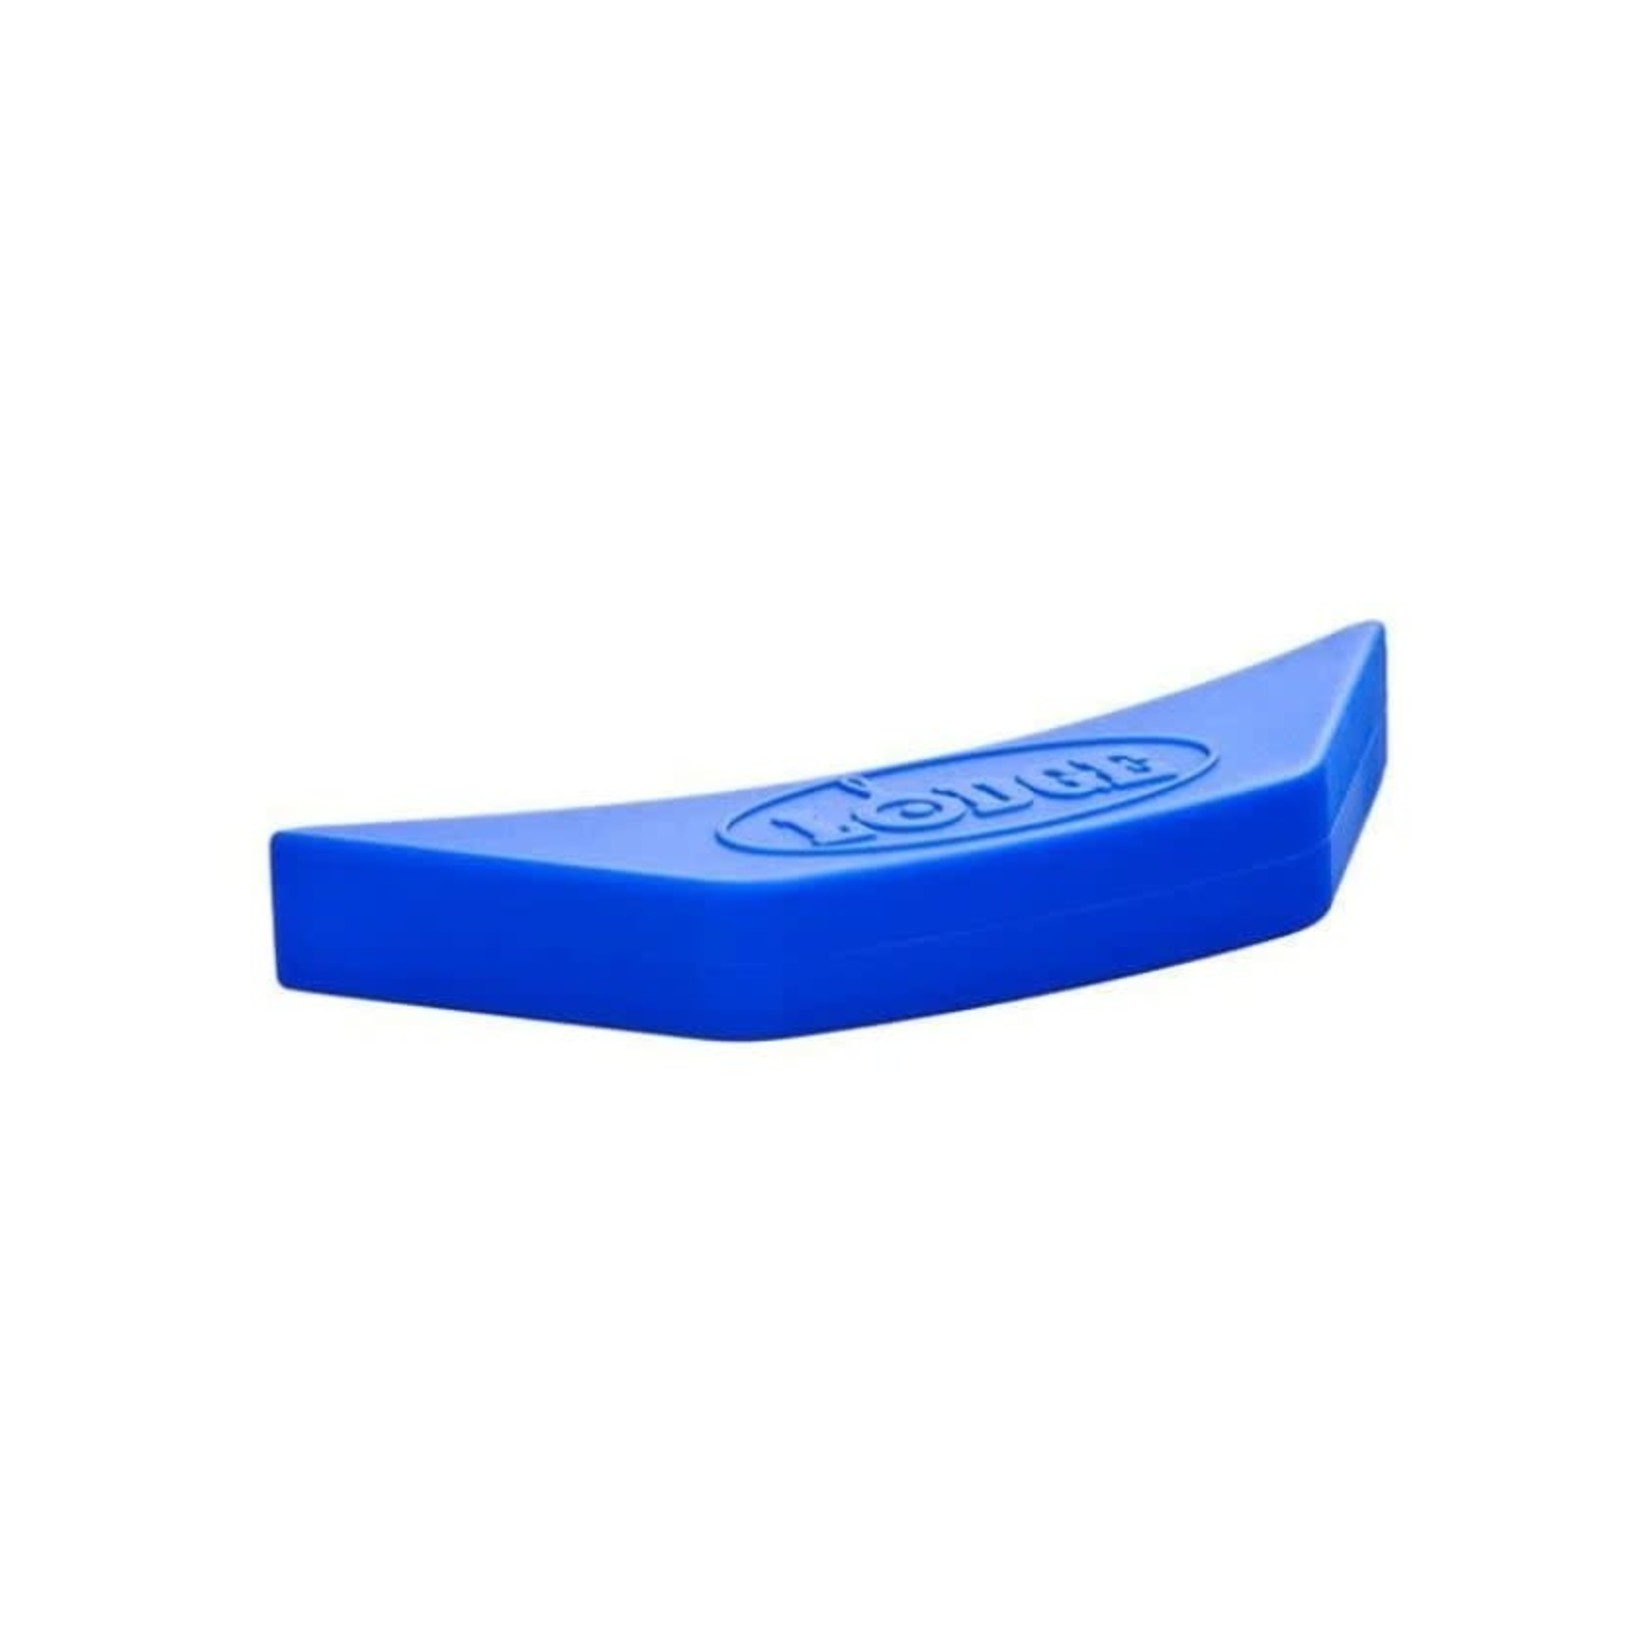 LODGE LODGE Silicone Assist Handle Holder - Blue